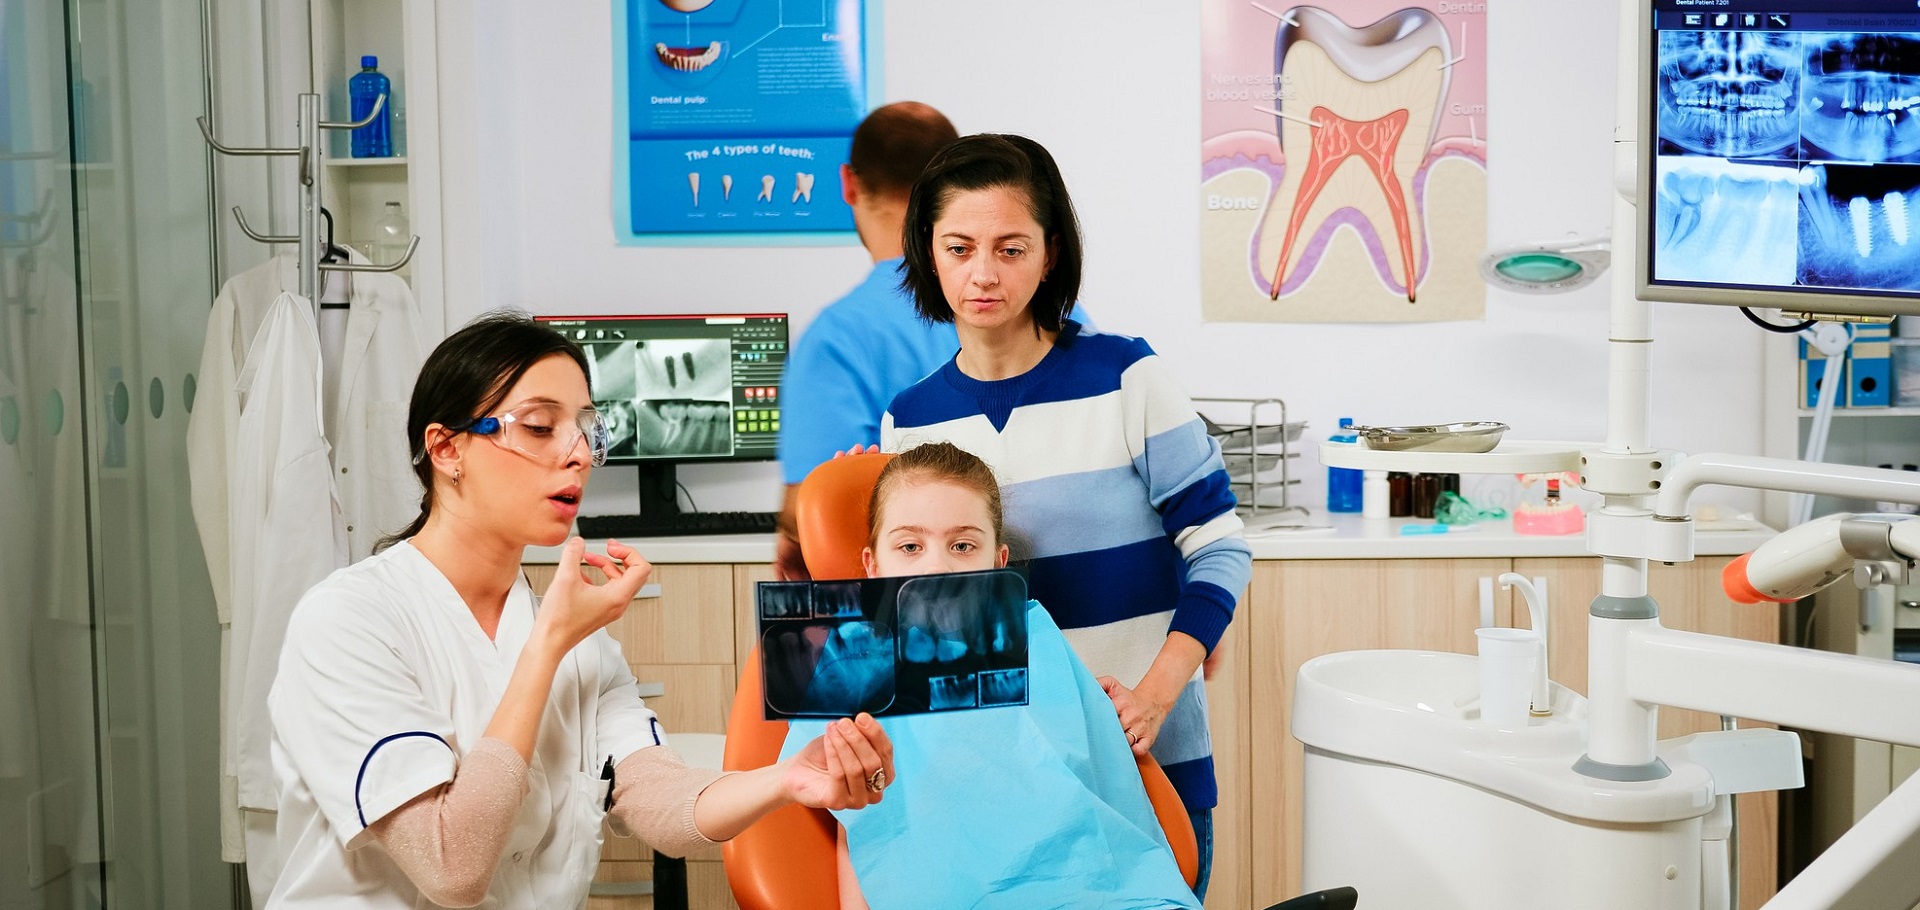 Dentists in Teeth Whitening: Advice from Oral Professionals